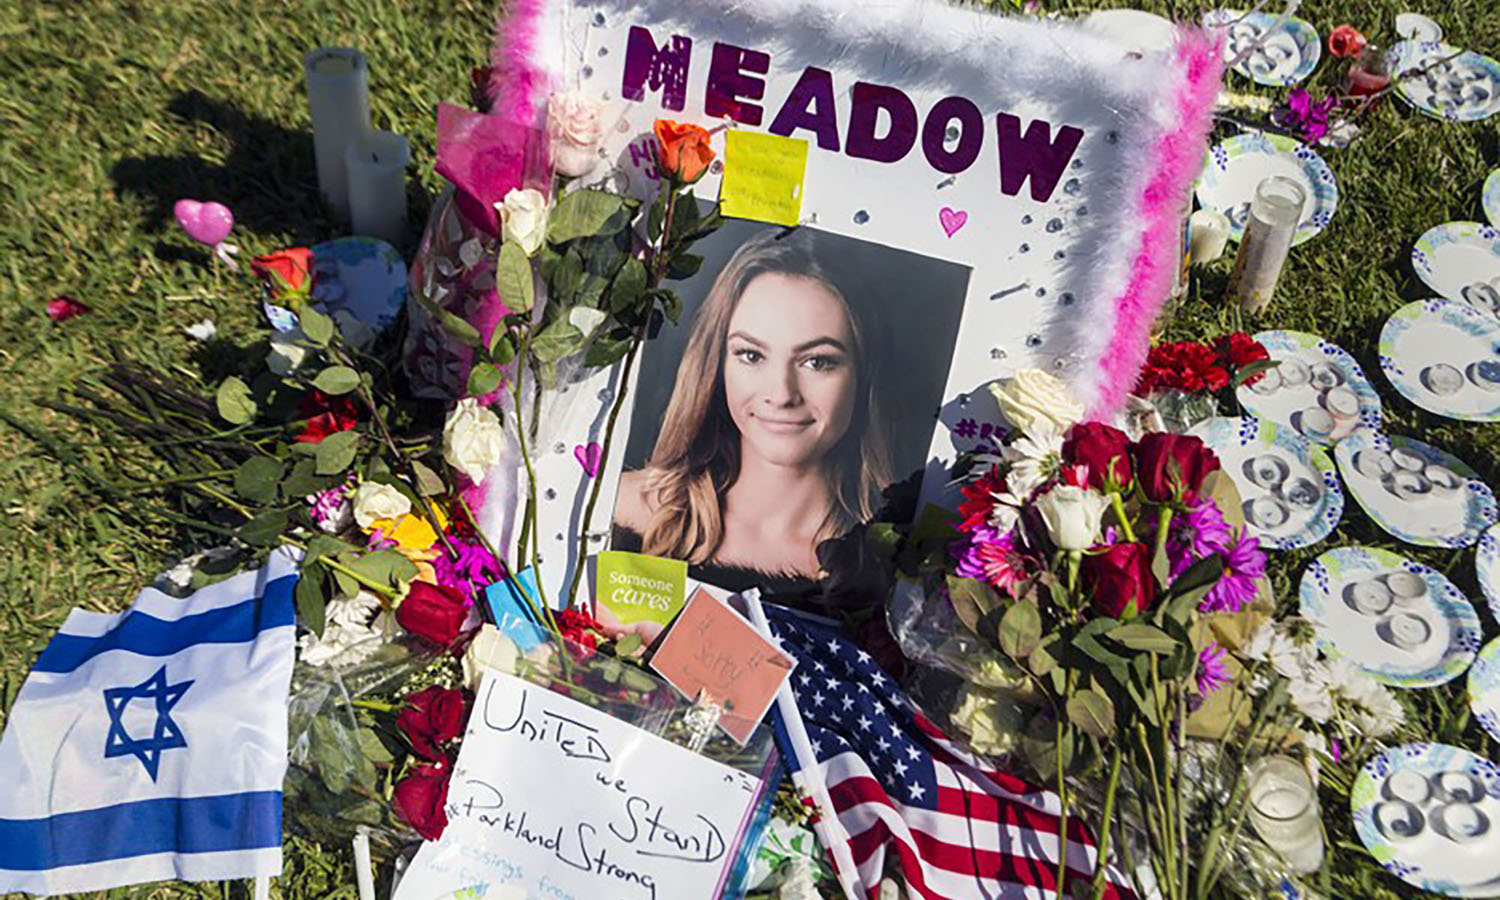 New Date Set for 'Ride for Meadow' Fundraiser 1